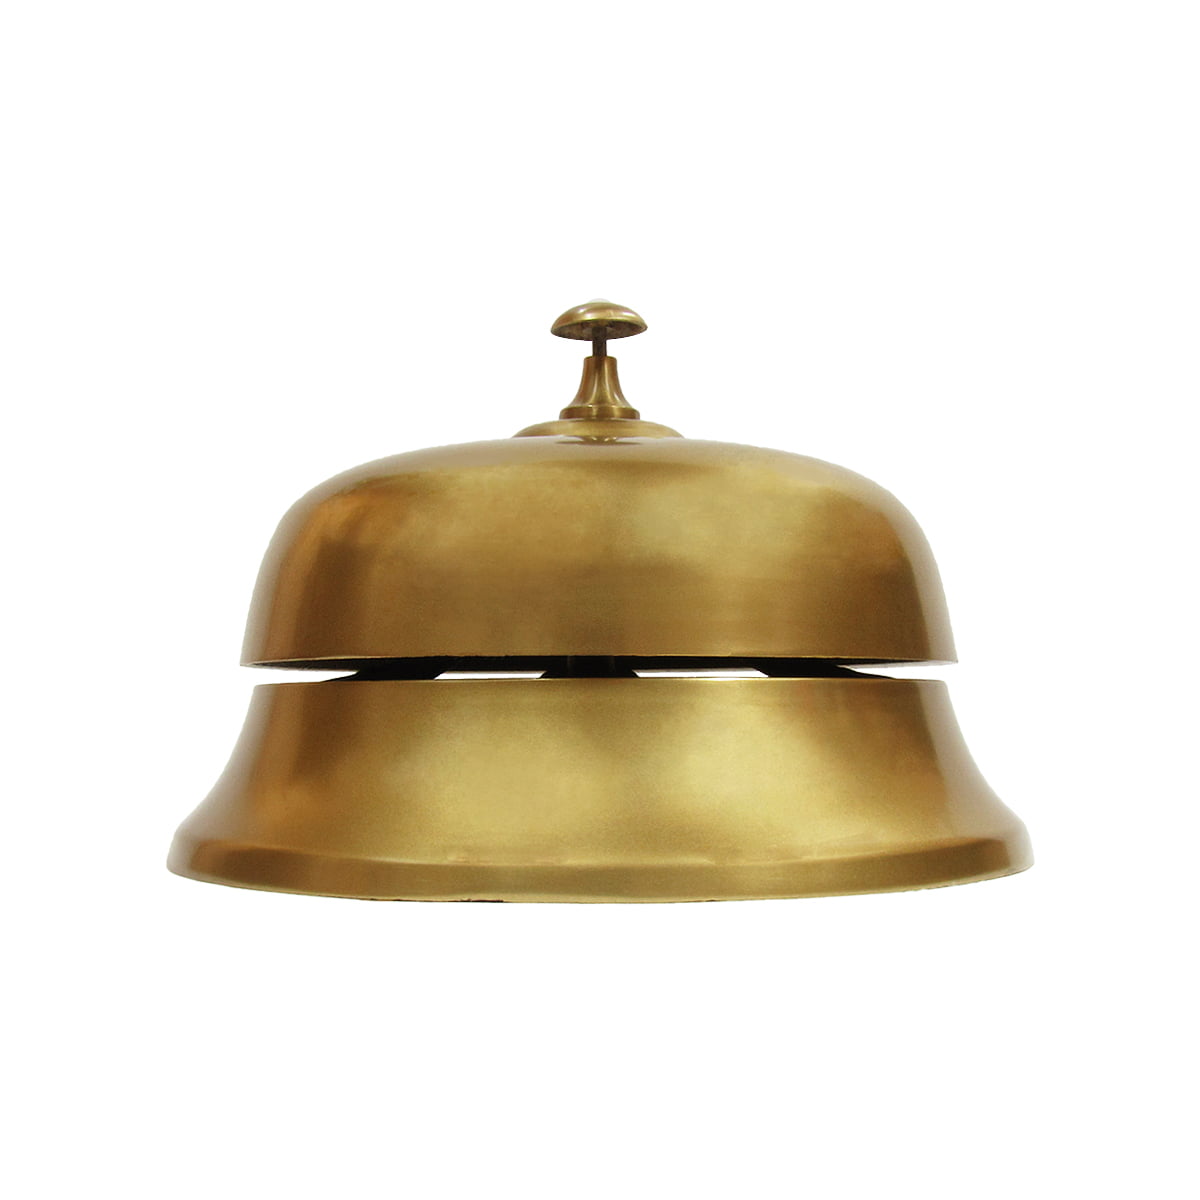 BRASS HOTEL FRONT DESK BELL SALES SERVICE COUNTER BELL ON WHEEL BASE 